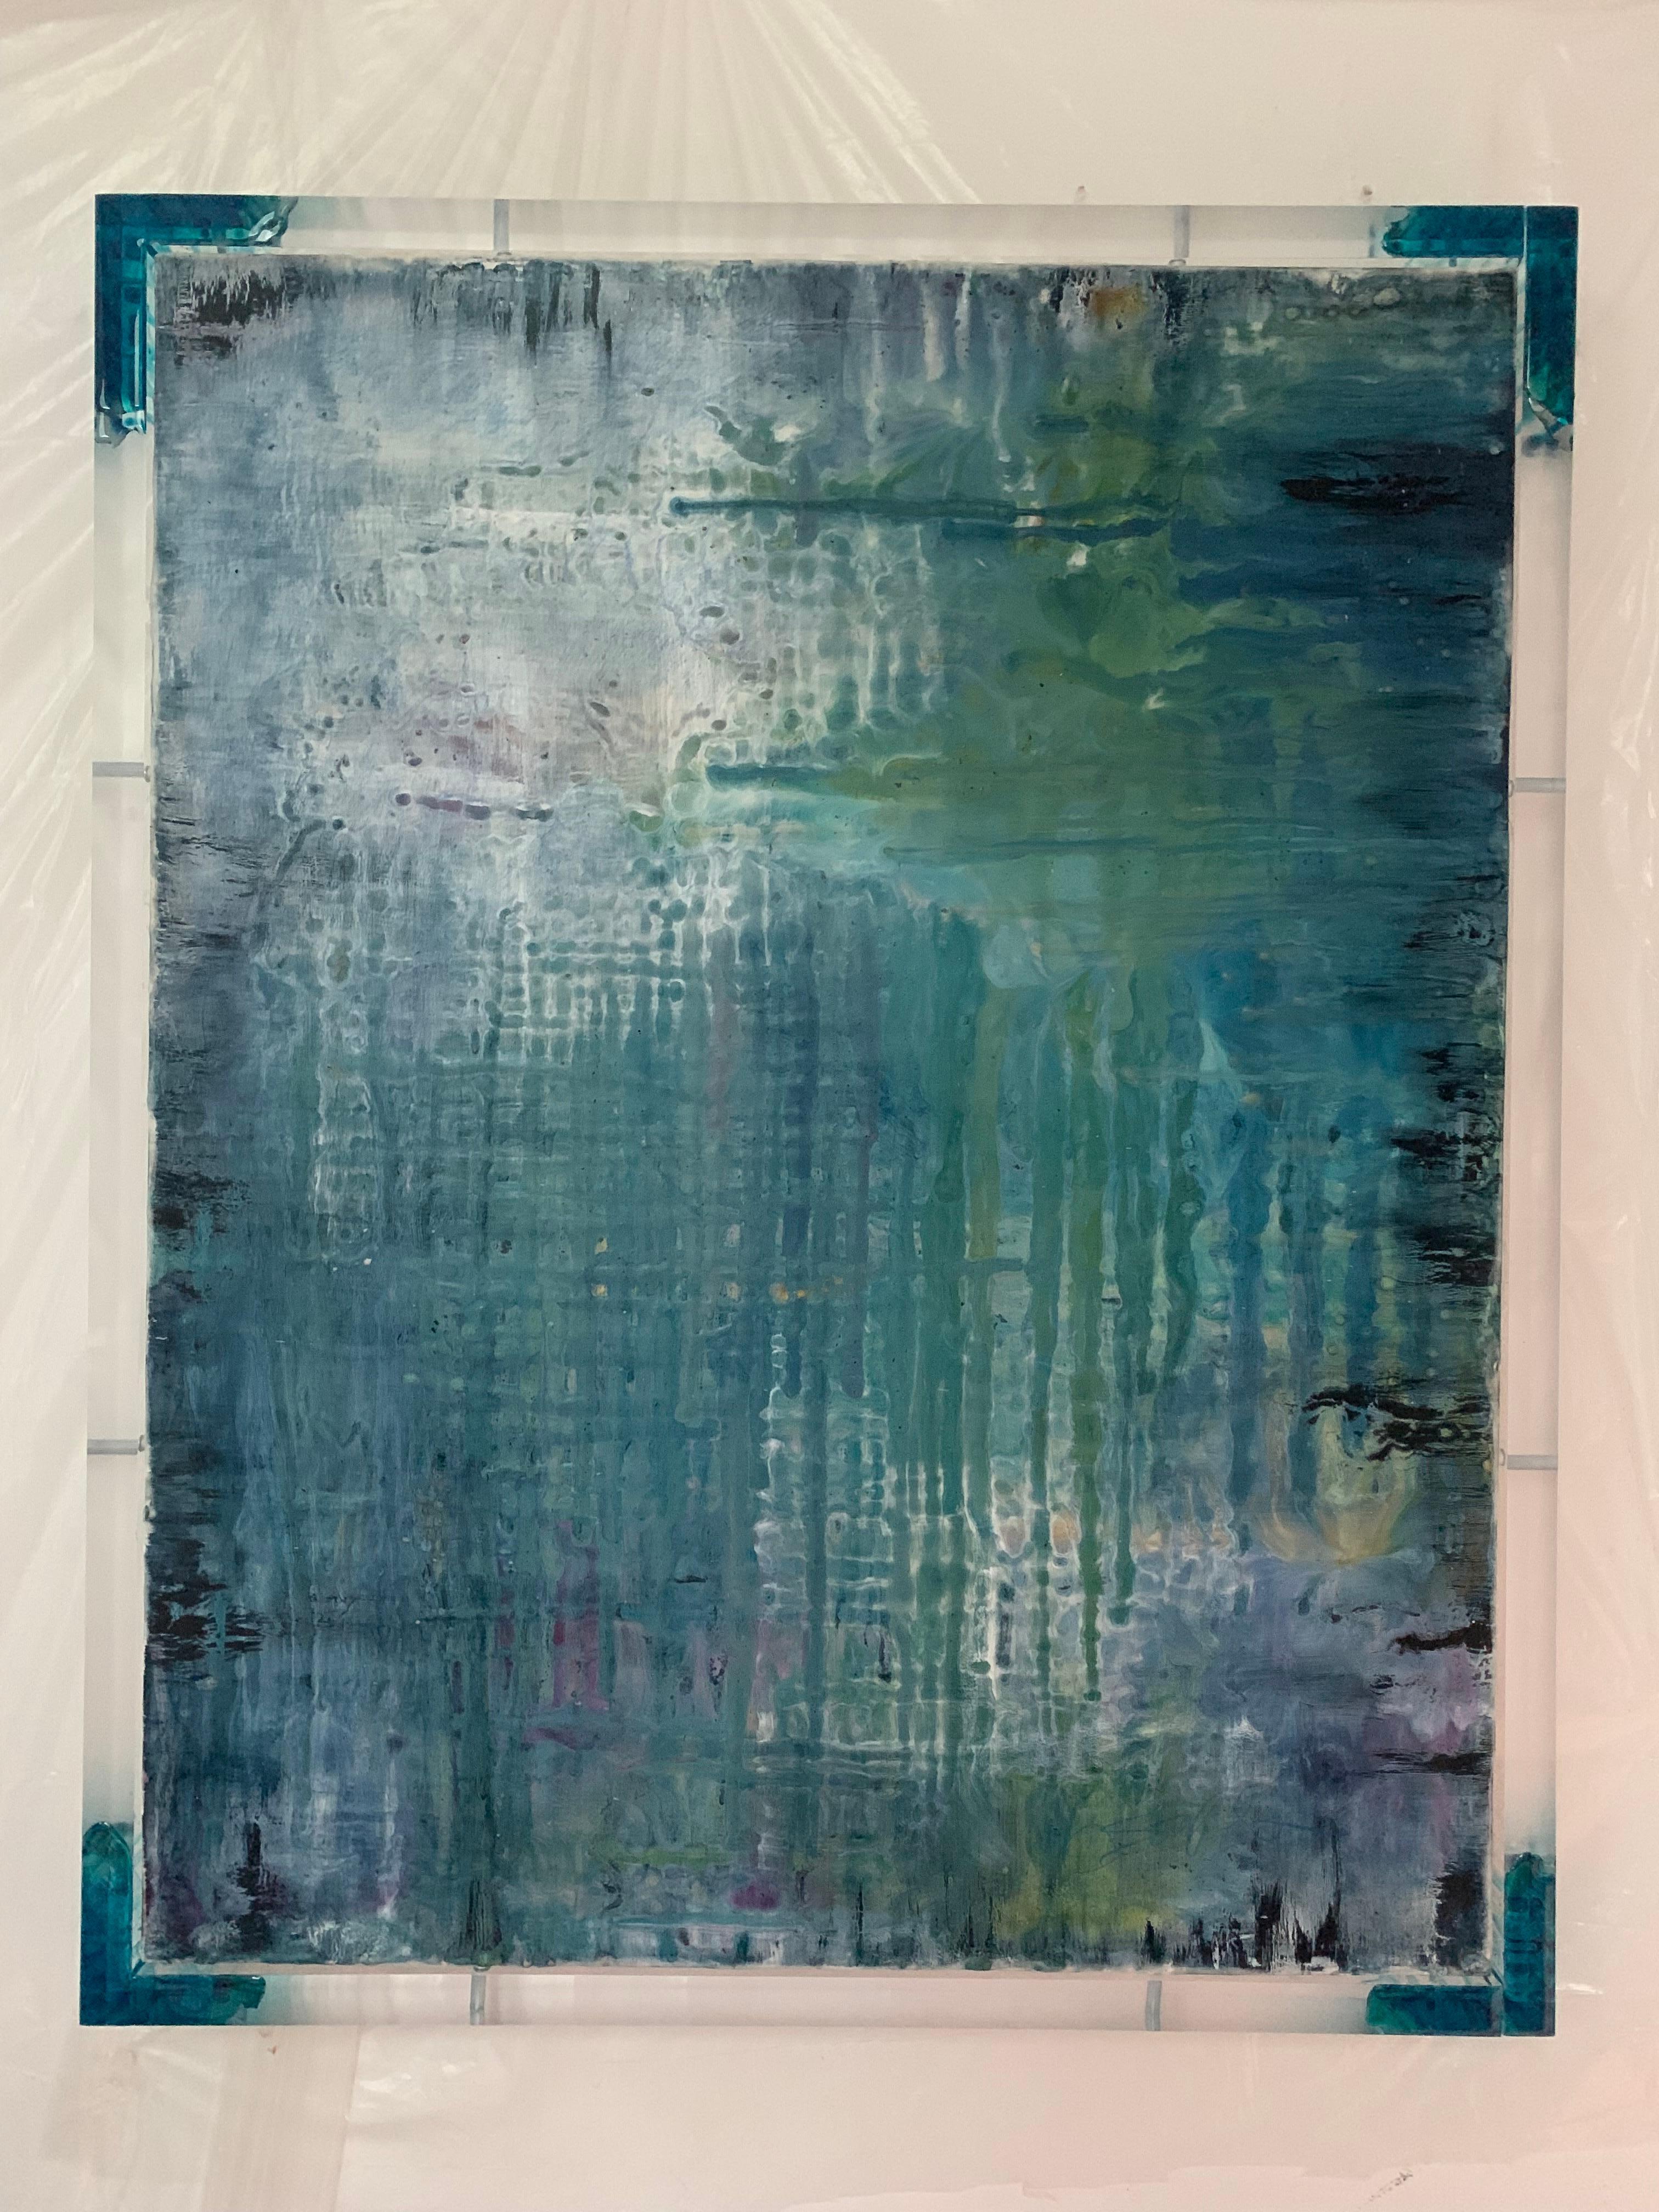 Encaustic and oil with acrylic frame

1/1, While experiencing the flow and drips of molten beeswax and the partial mixing of blue, cyan and purple in Pool Lights, calm is created within chaos. The white overlay guides the viewer towards the